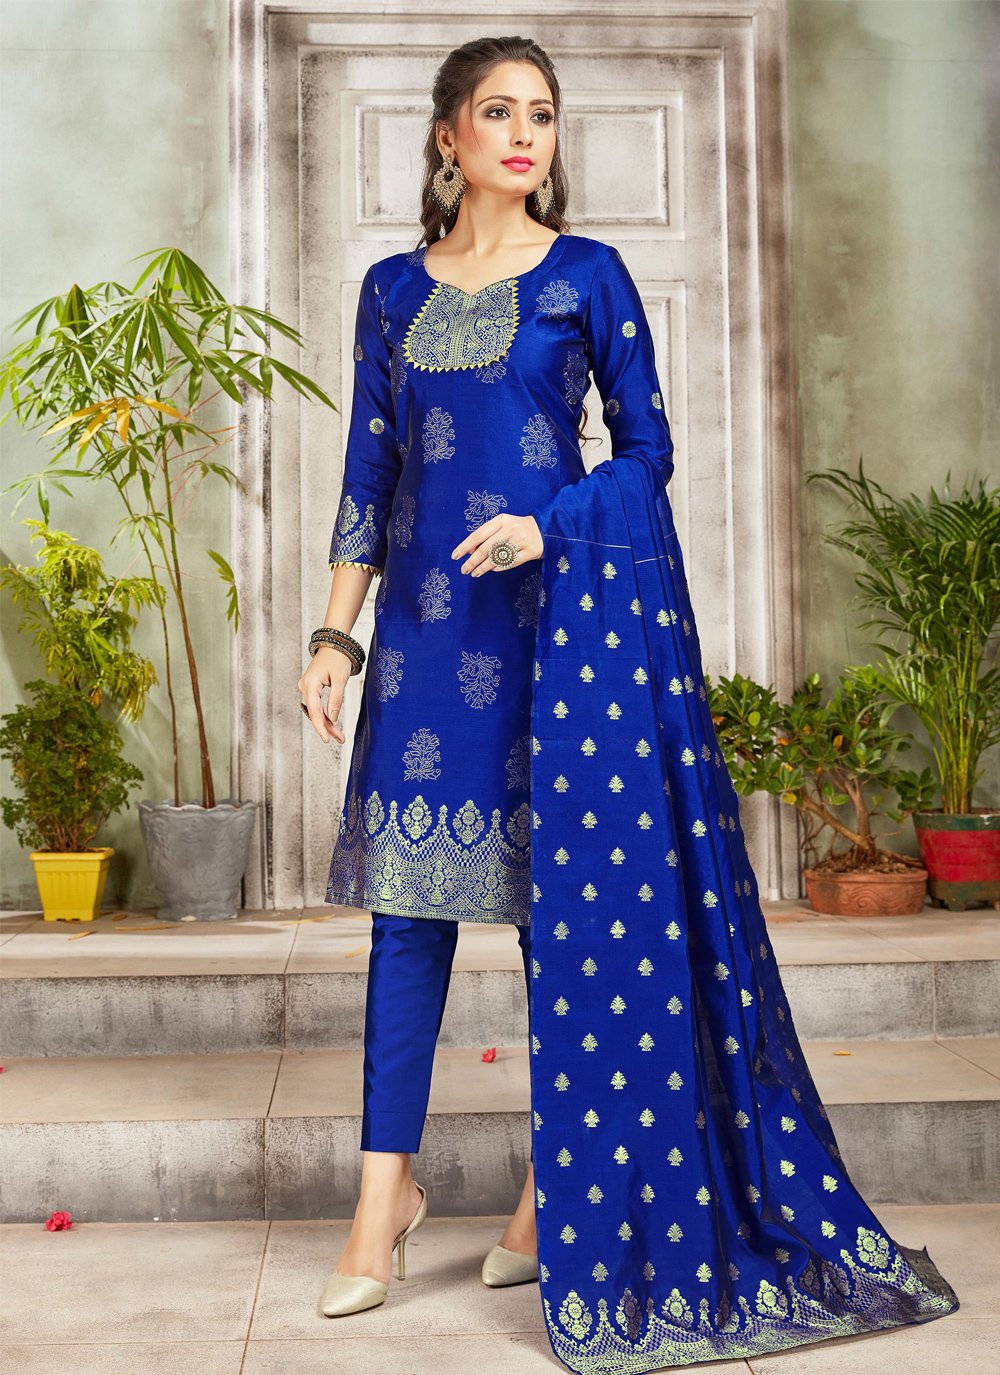 Blue Salwar Suit, For Party Wear at Rs 1500 in Bengaluru | ID: 10960281033